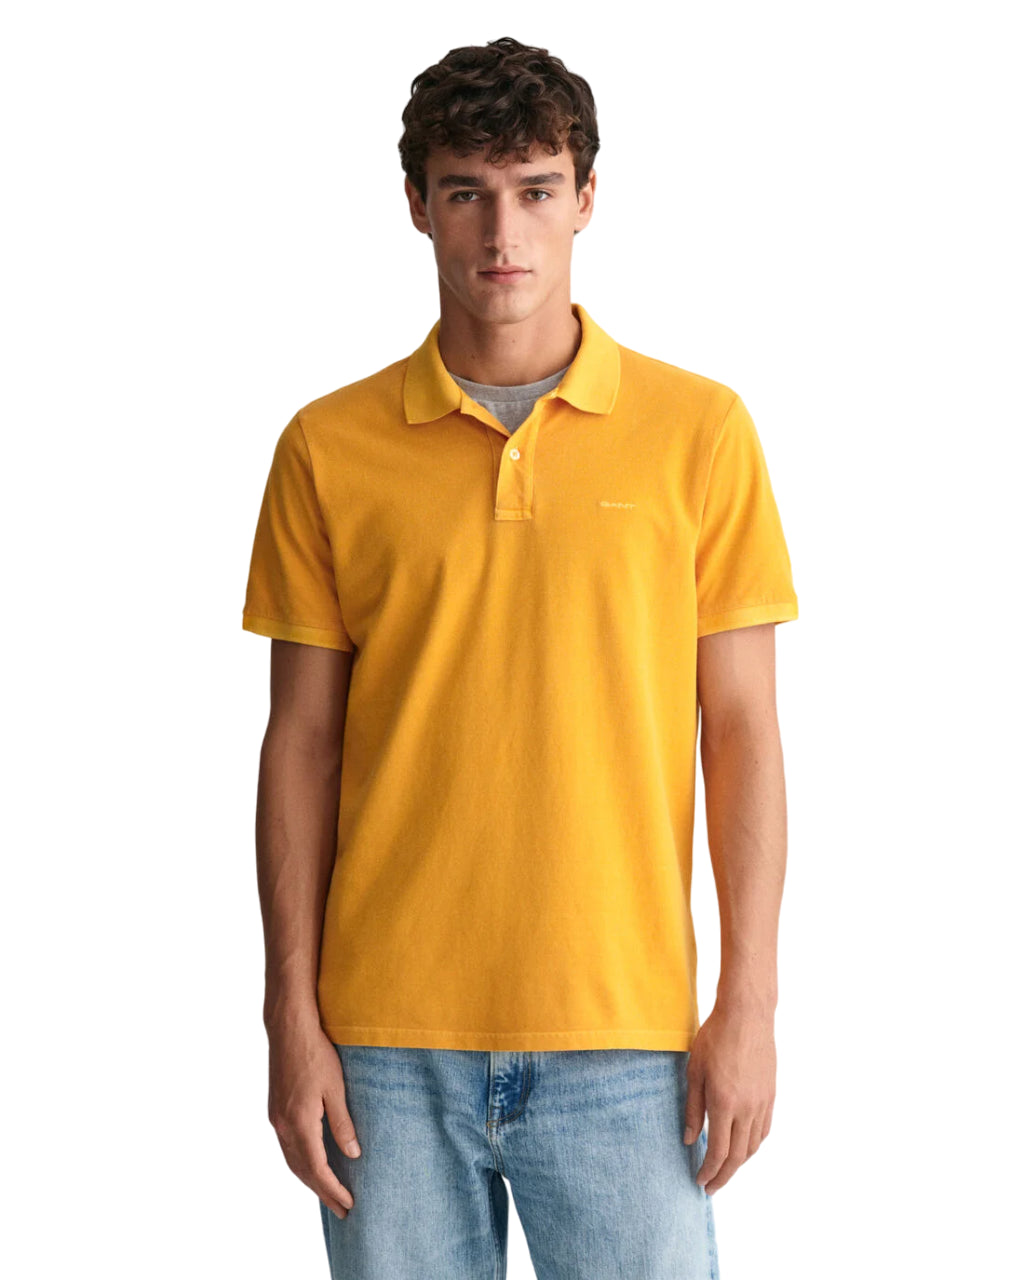 GANT POLO SUNFADED IN PIQUE REGULAR FIT MEDAL YELLOW